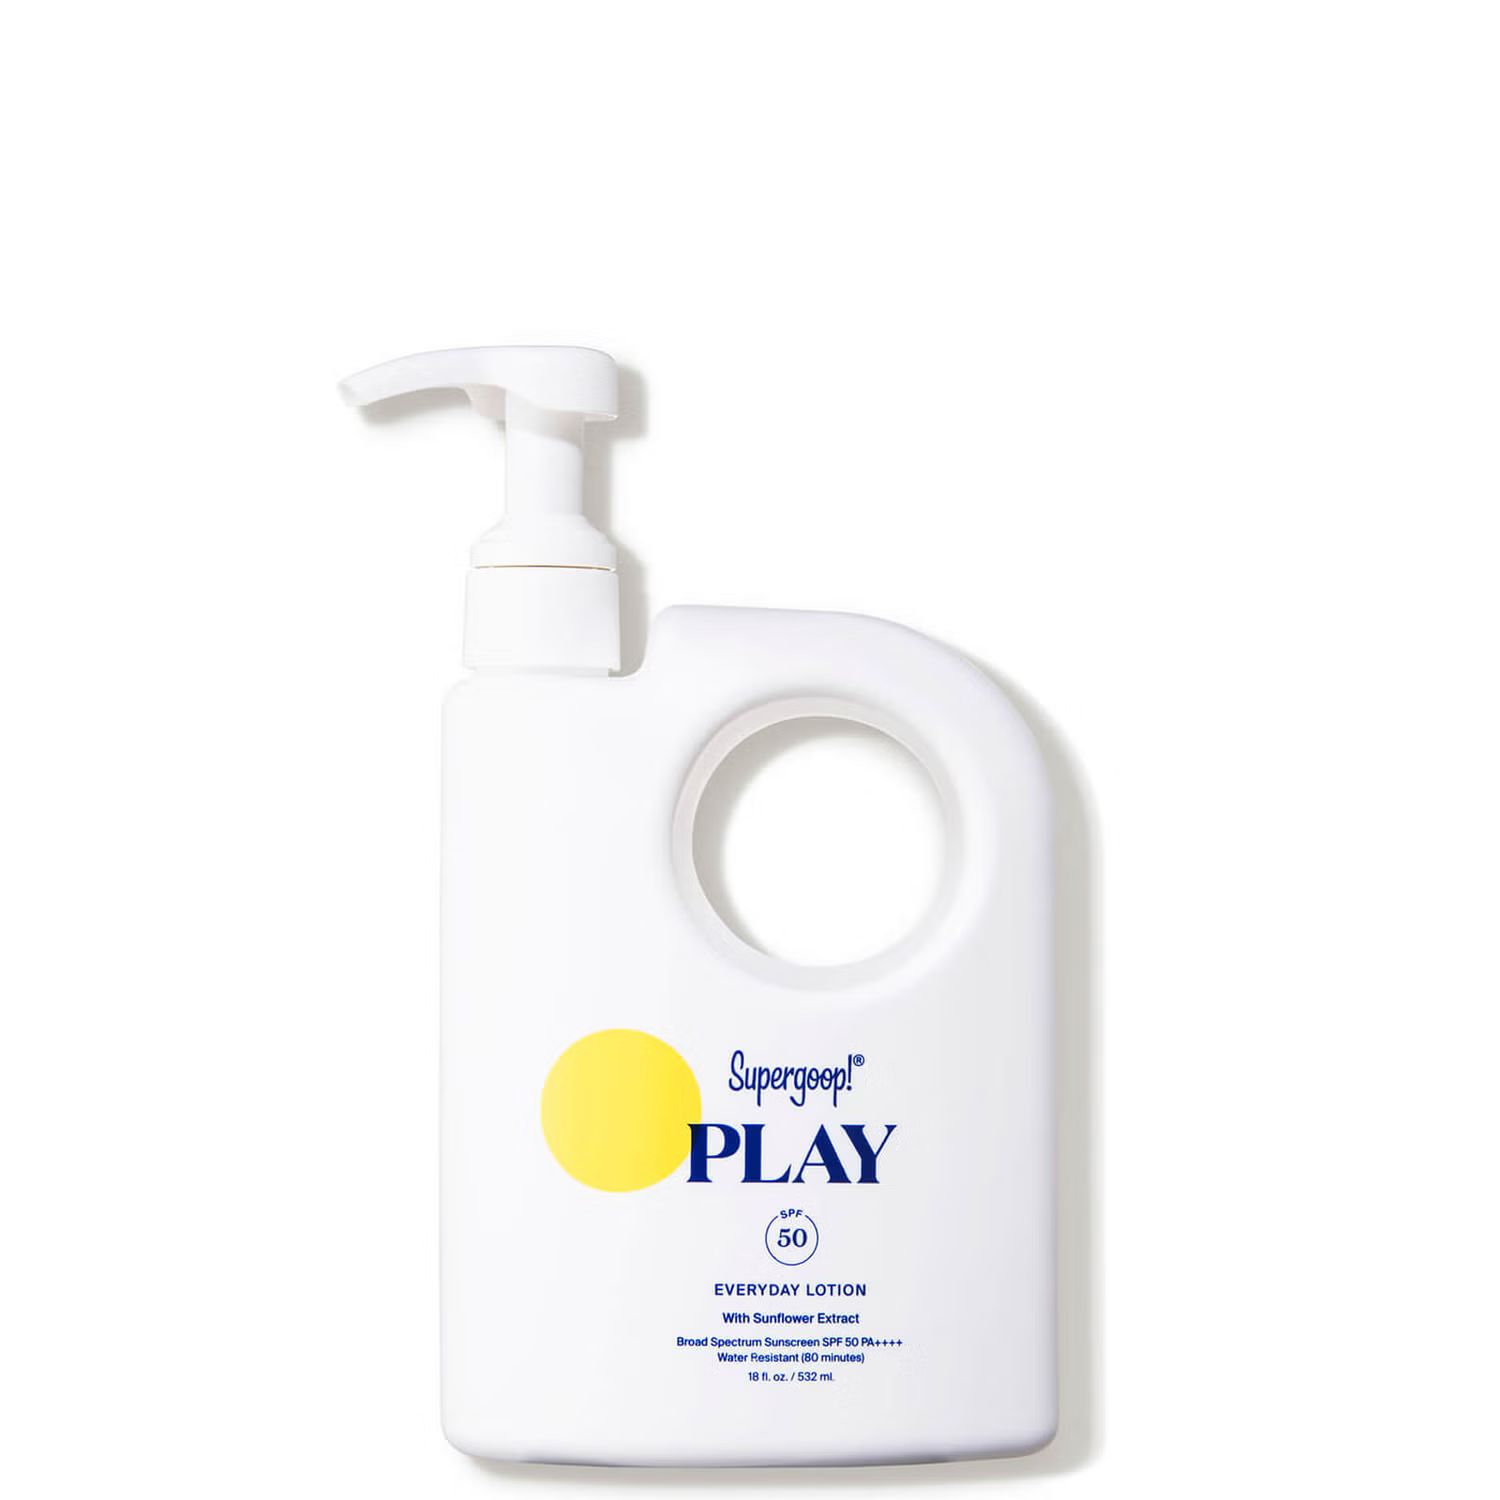 Supergoop!® PLAY Everyday Lotion SPF 50 with Sunflower Extract 18 fl. oz. | Dermstore (US)